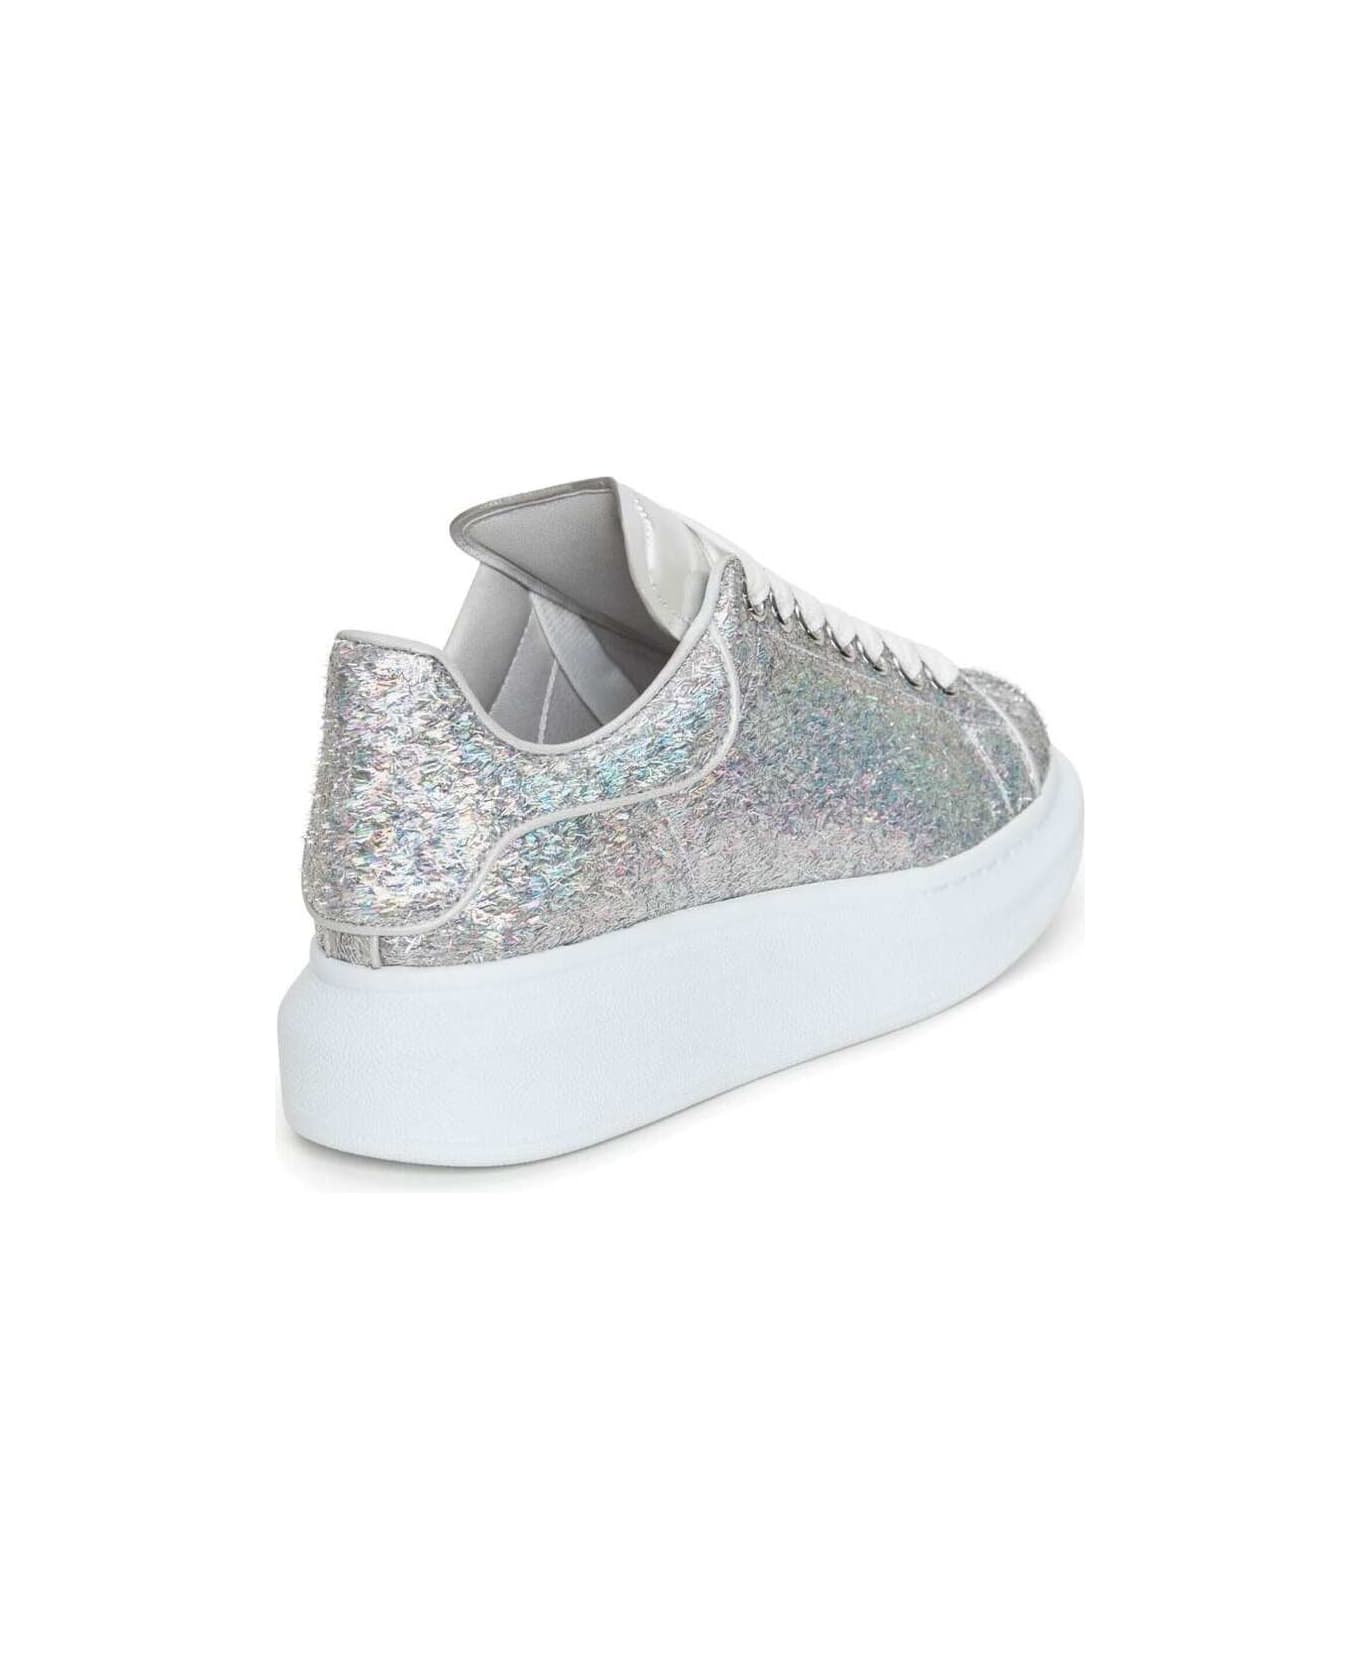 Alexander McQueen Silver Low Top Sneakers With All-over Glitters And Oversized Platform In Faux Leather Woman - Metallic ウェッジシューズ